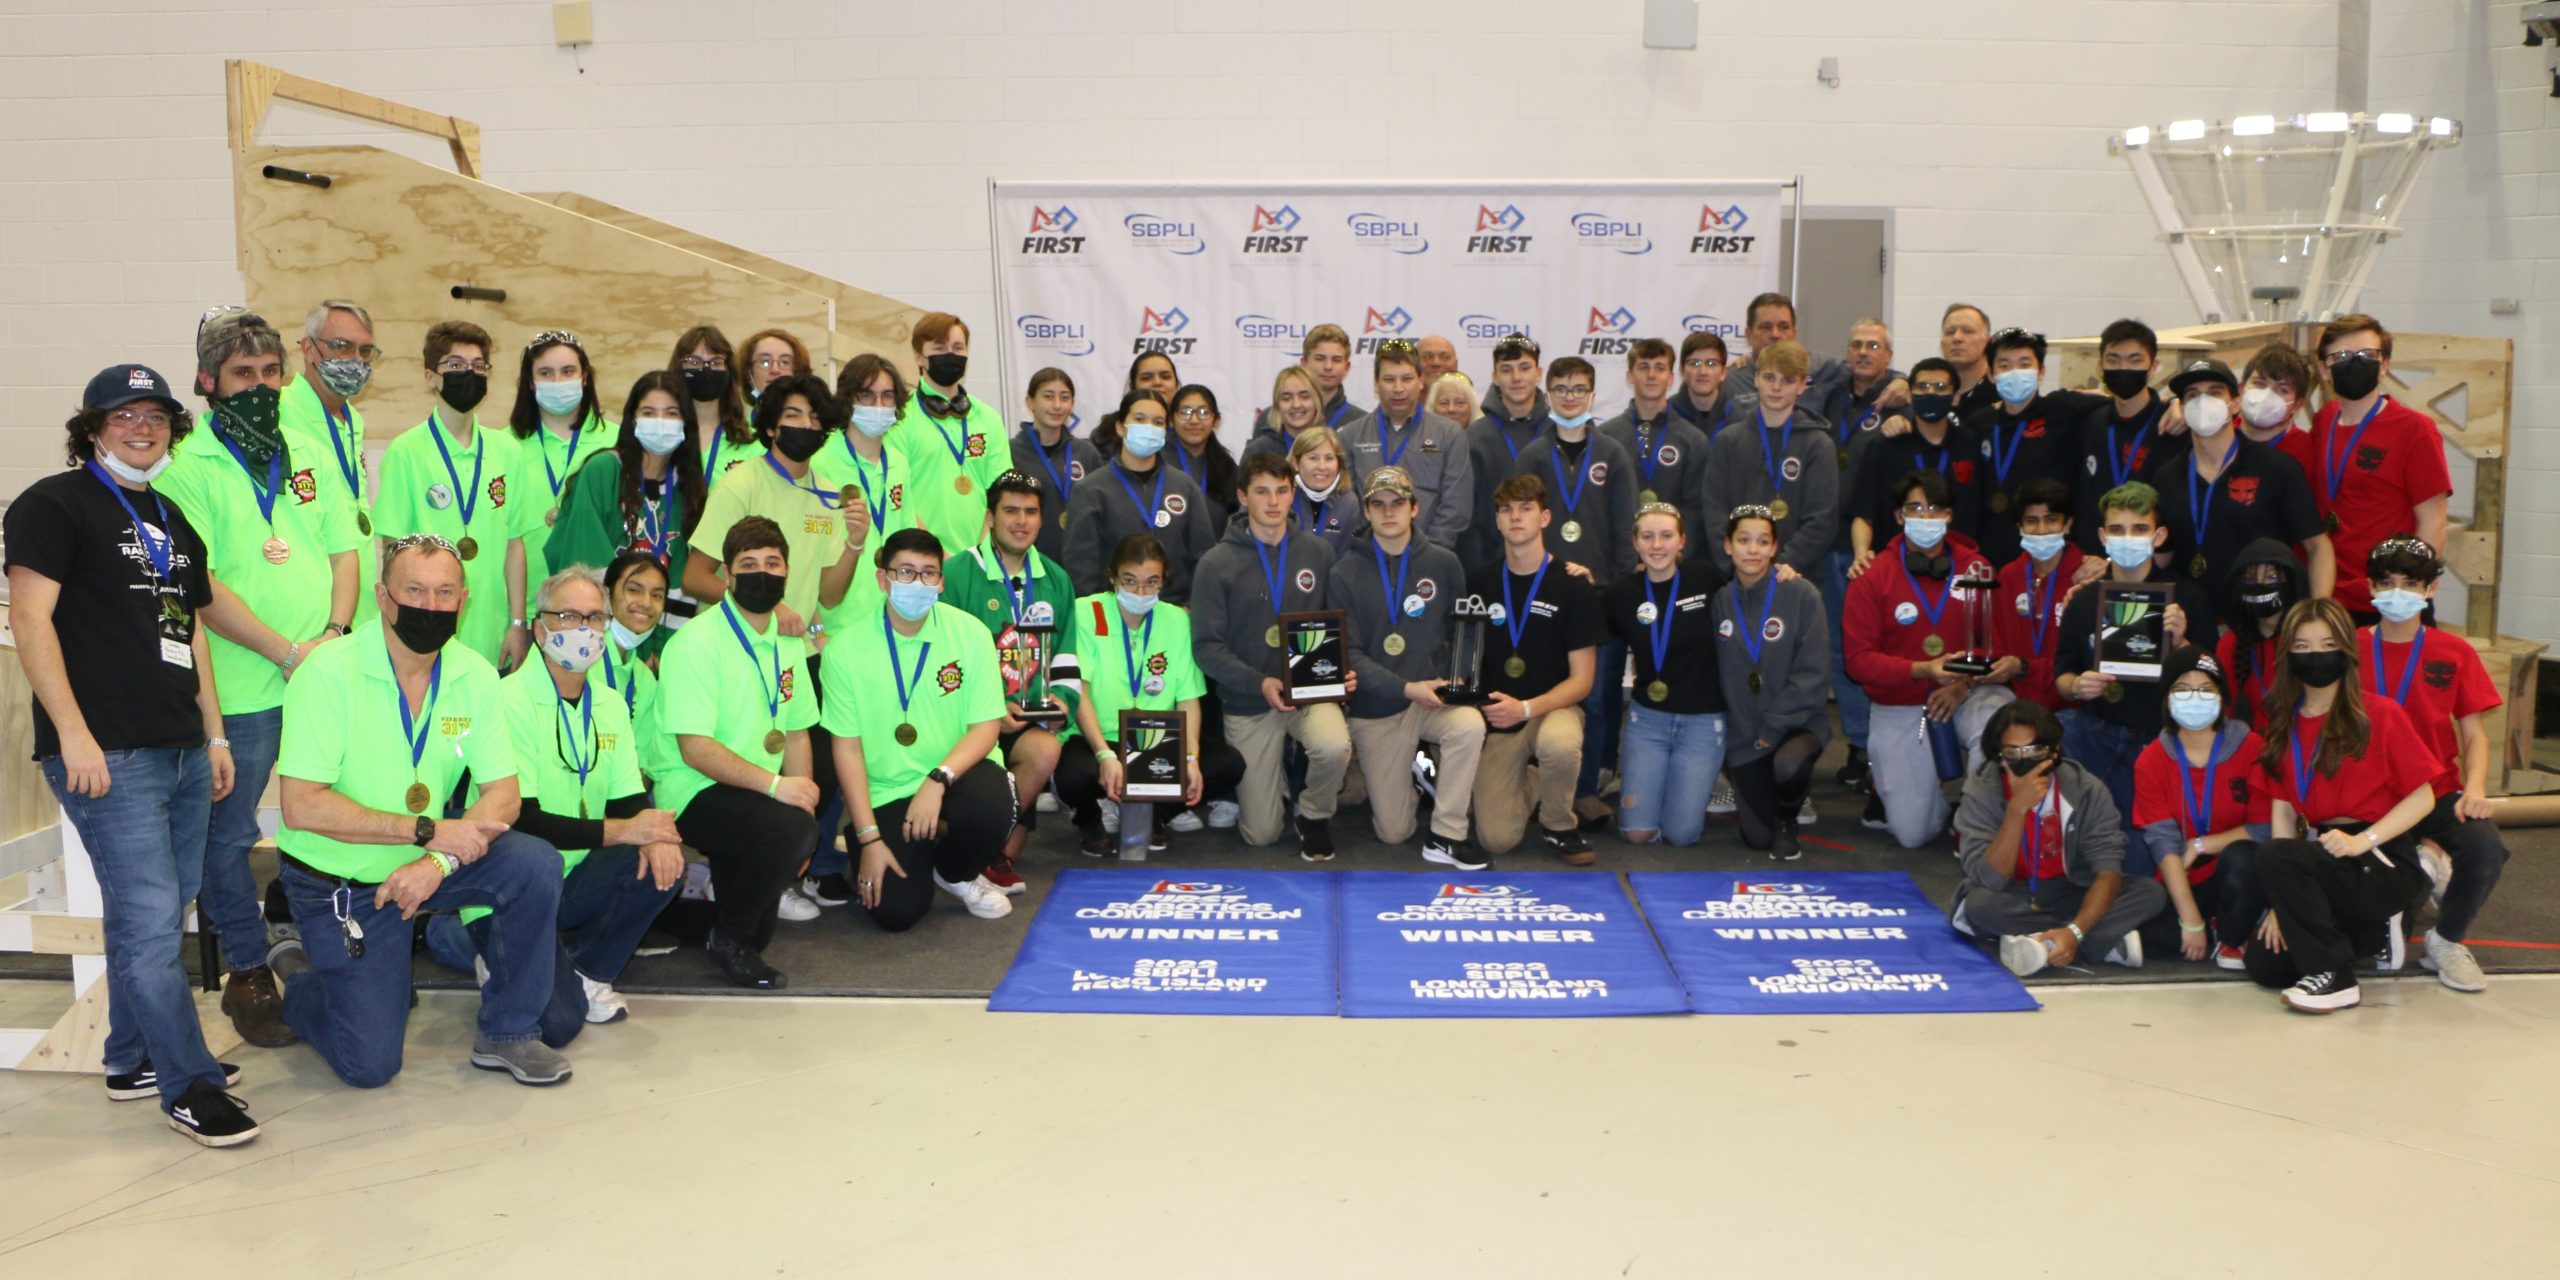 The winning alliance of (left to right) Team #3171 “HURRICANES” from Westhampton Beach High School, Team #870 “Team R.I.C.E.” from Southold Jr. Sr. High School and Team #2872 “CyberCats” from The Wheatley School display their championship banners during the 2022 SBPLI Long Island Regional #1.